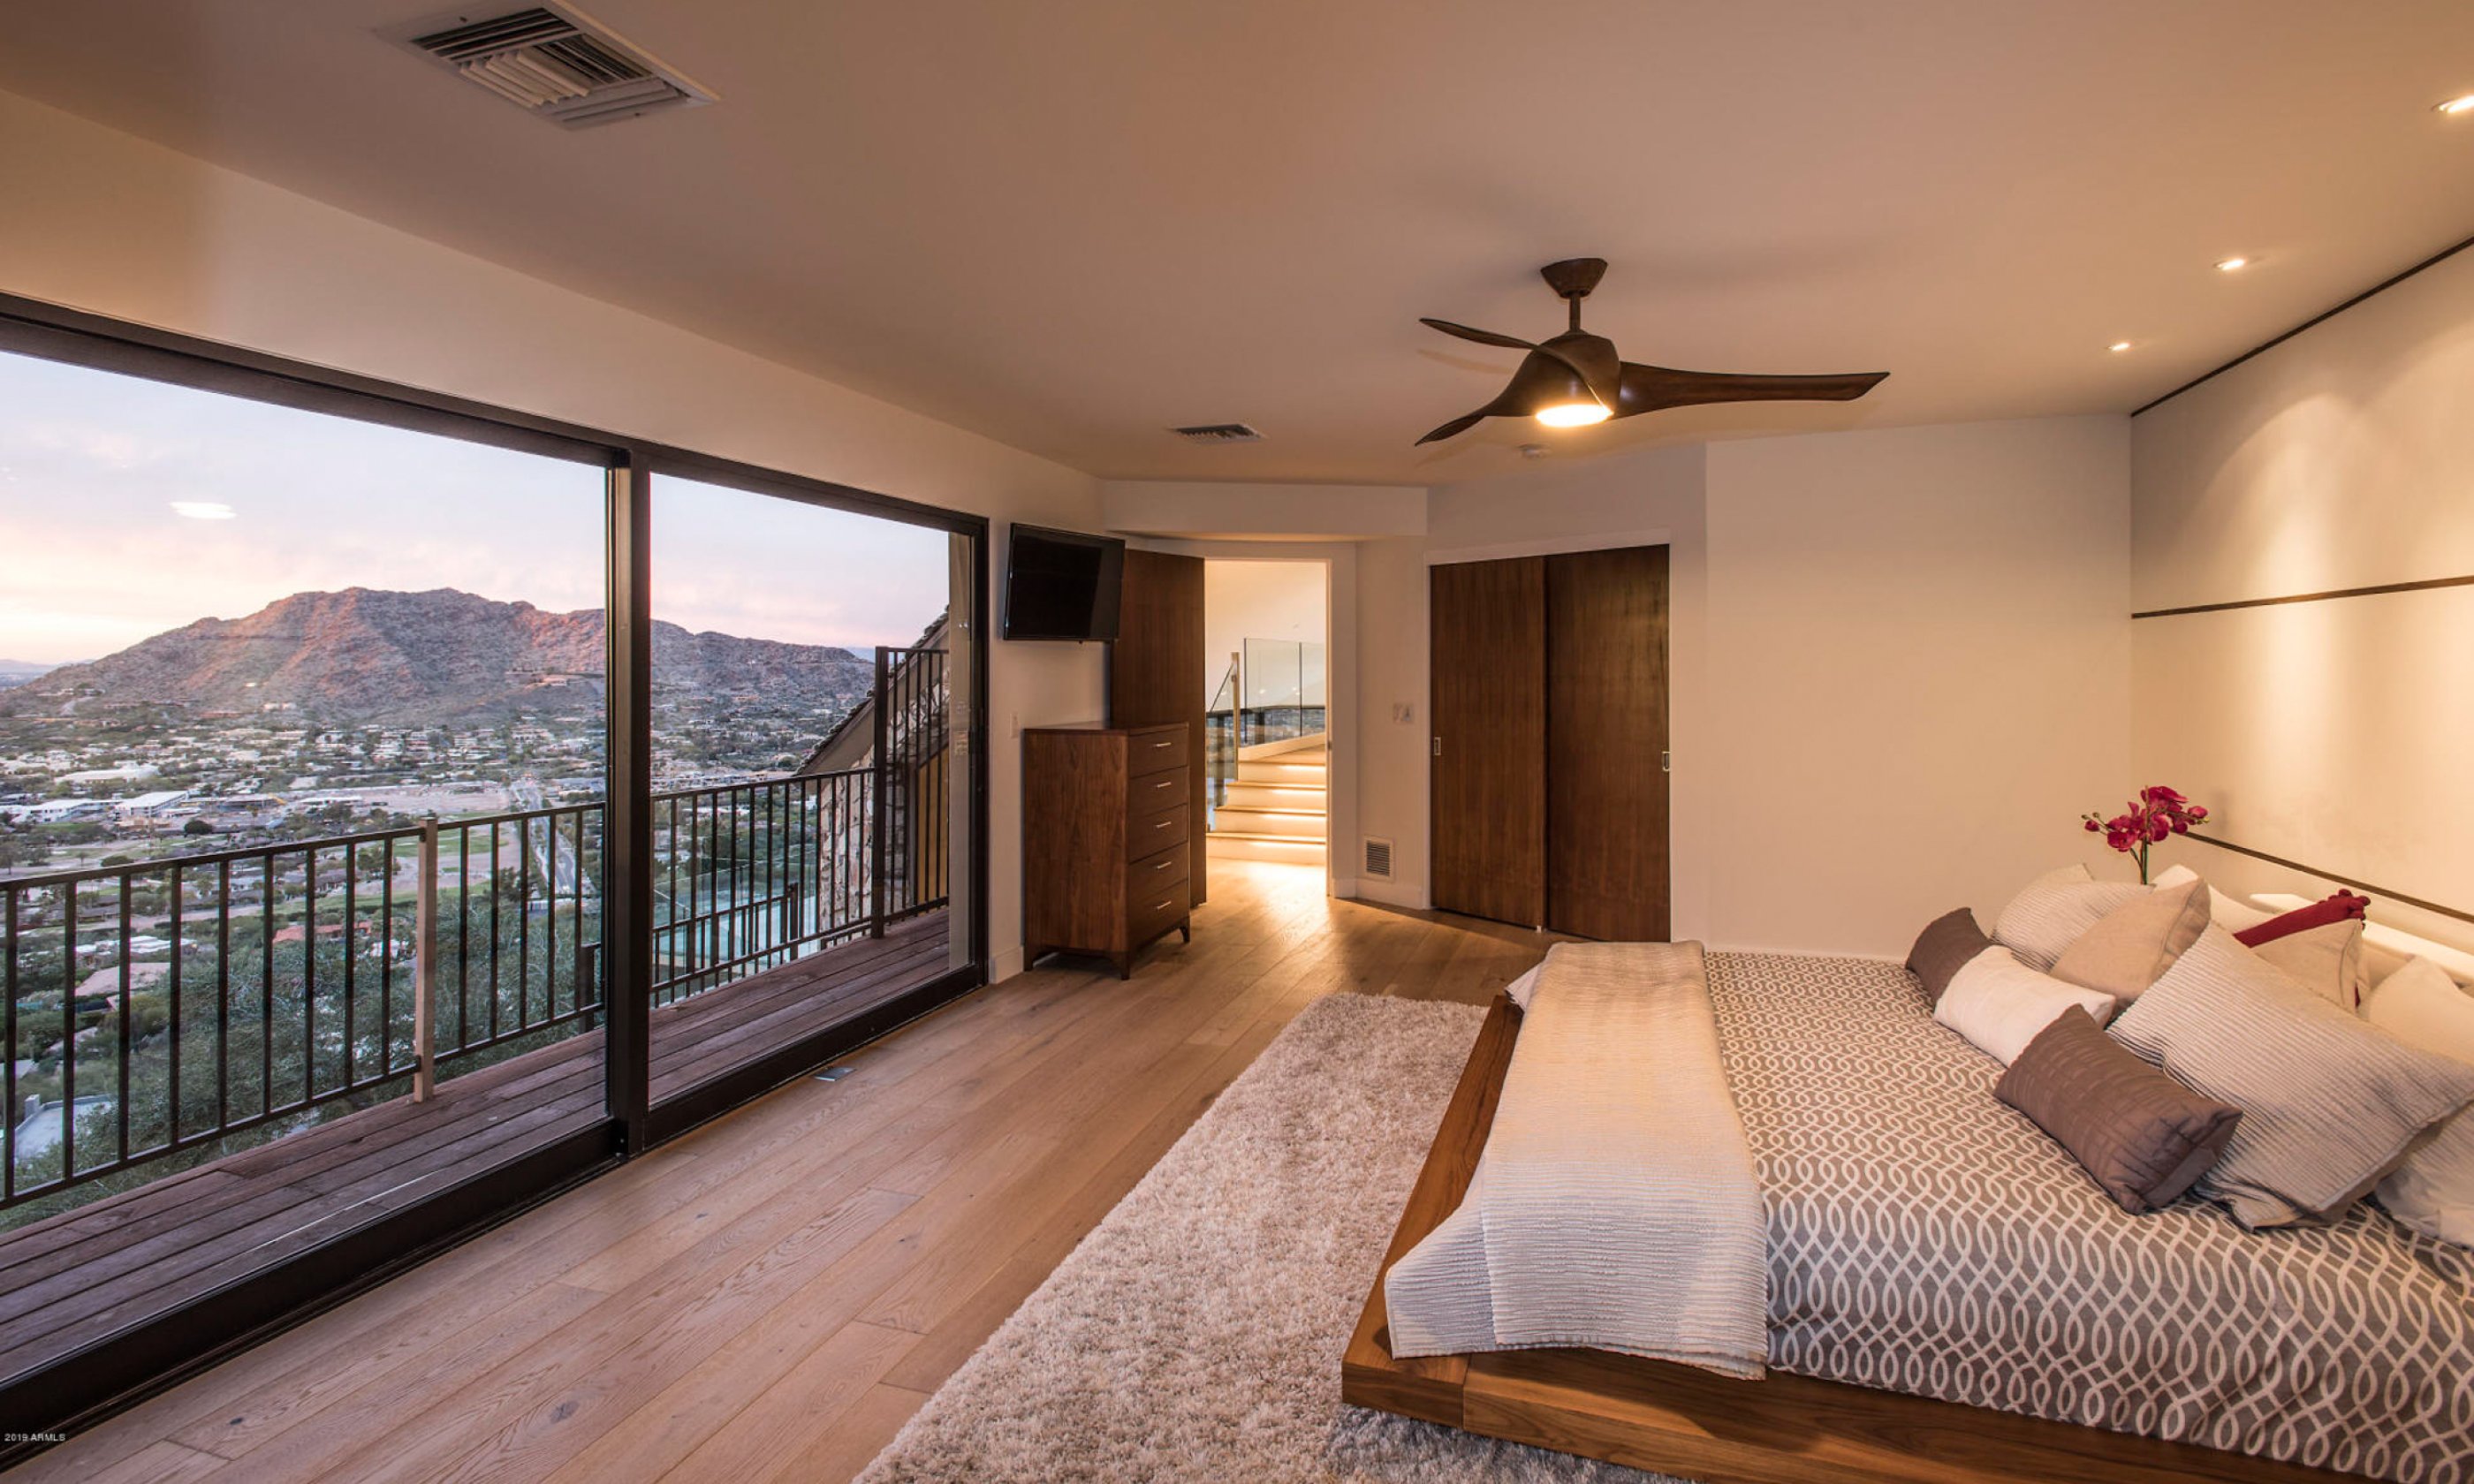 Bedroom with king bed, ceiling fan and floor-to-ceiling window showing surrounding valley.